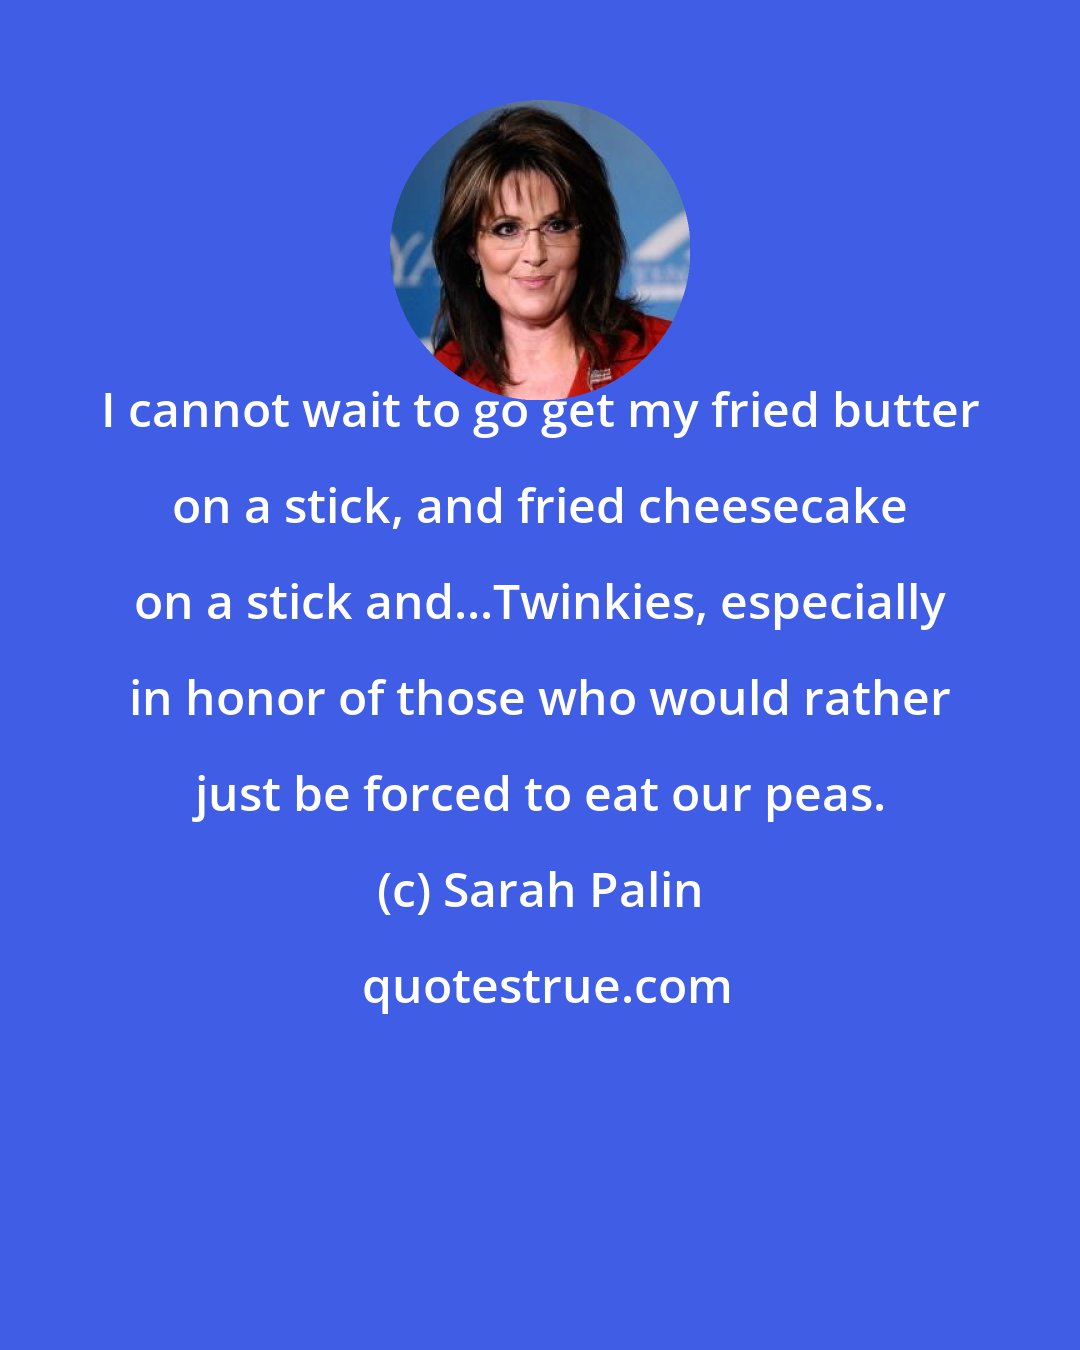 Sarah Palin: I cannot wait to go get my fried butter on a stick, and fried cheesecake on a stick and...Twinkies, especially in honor of those who would rather just be forced to eat our peas.